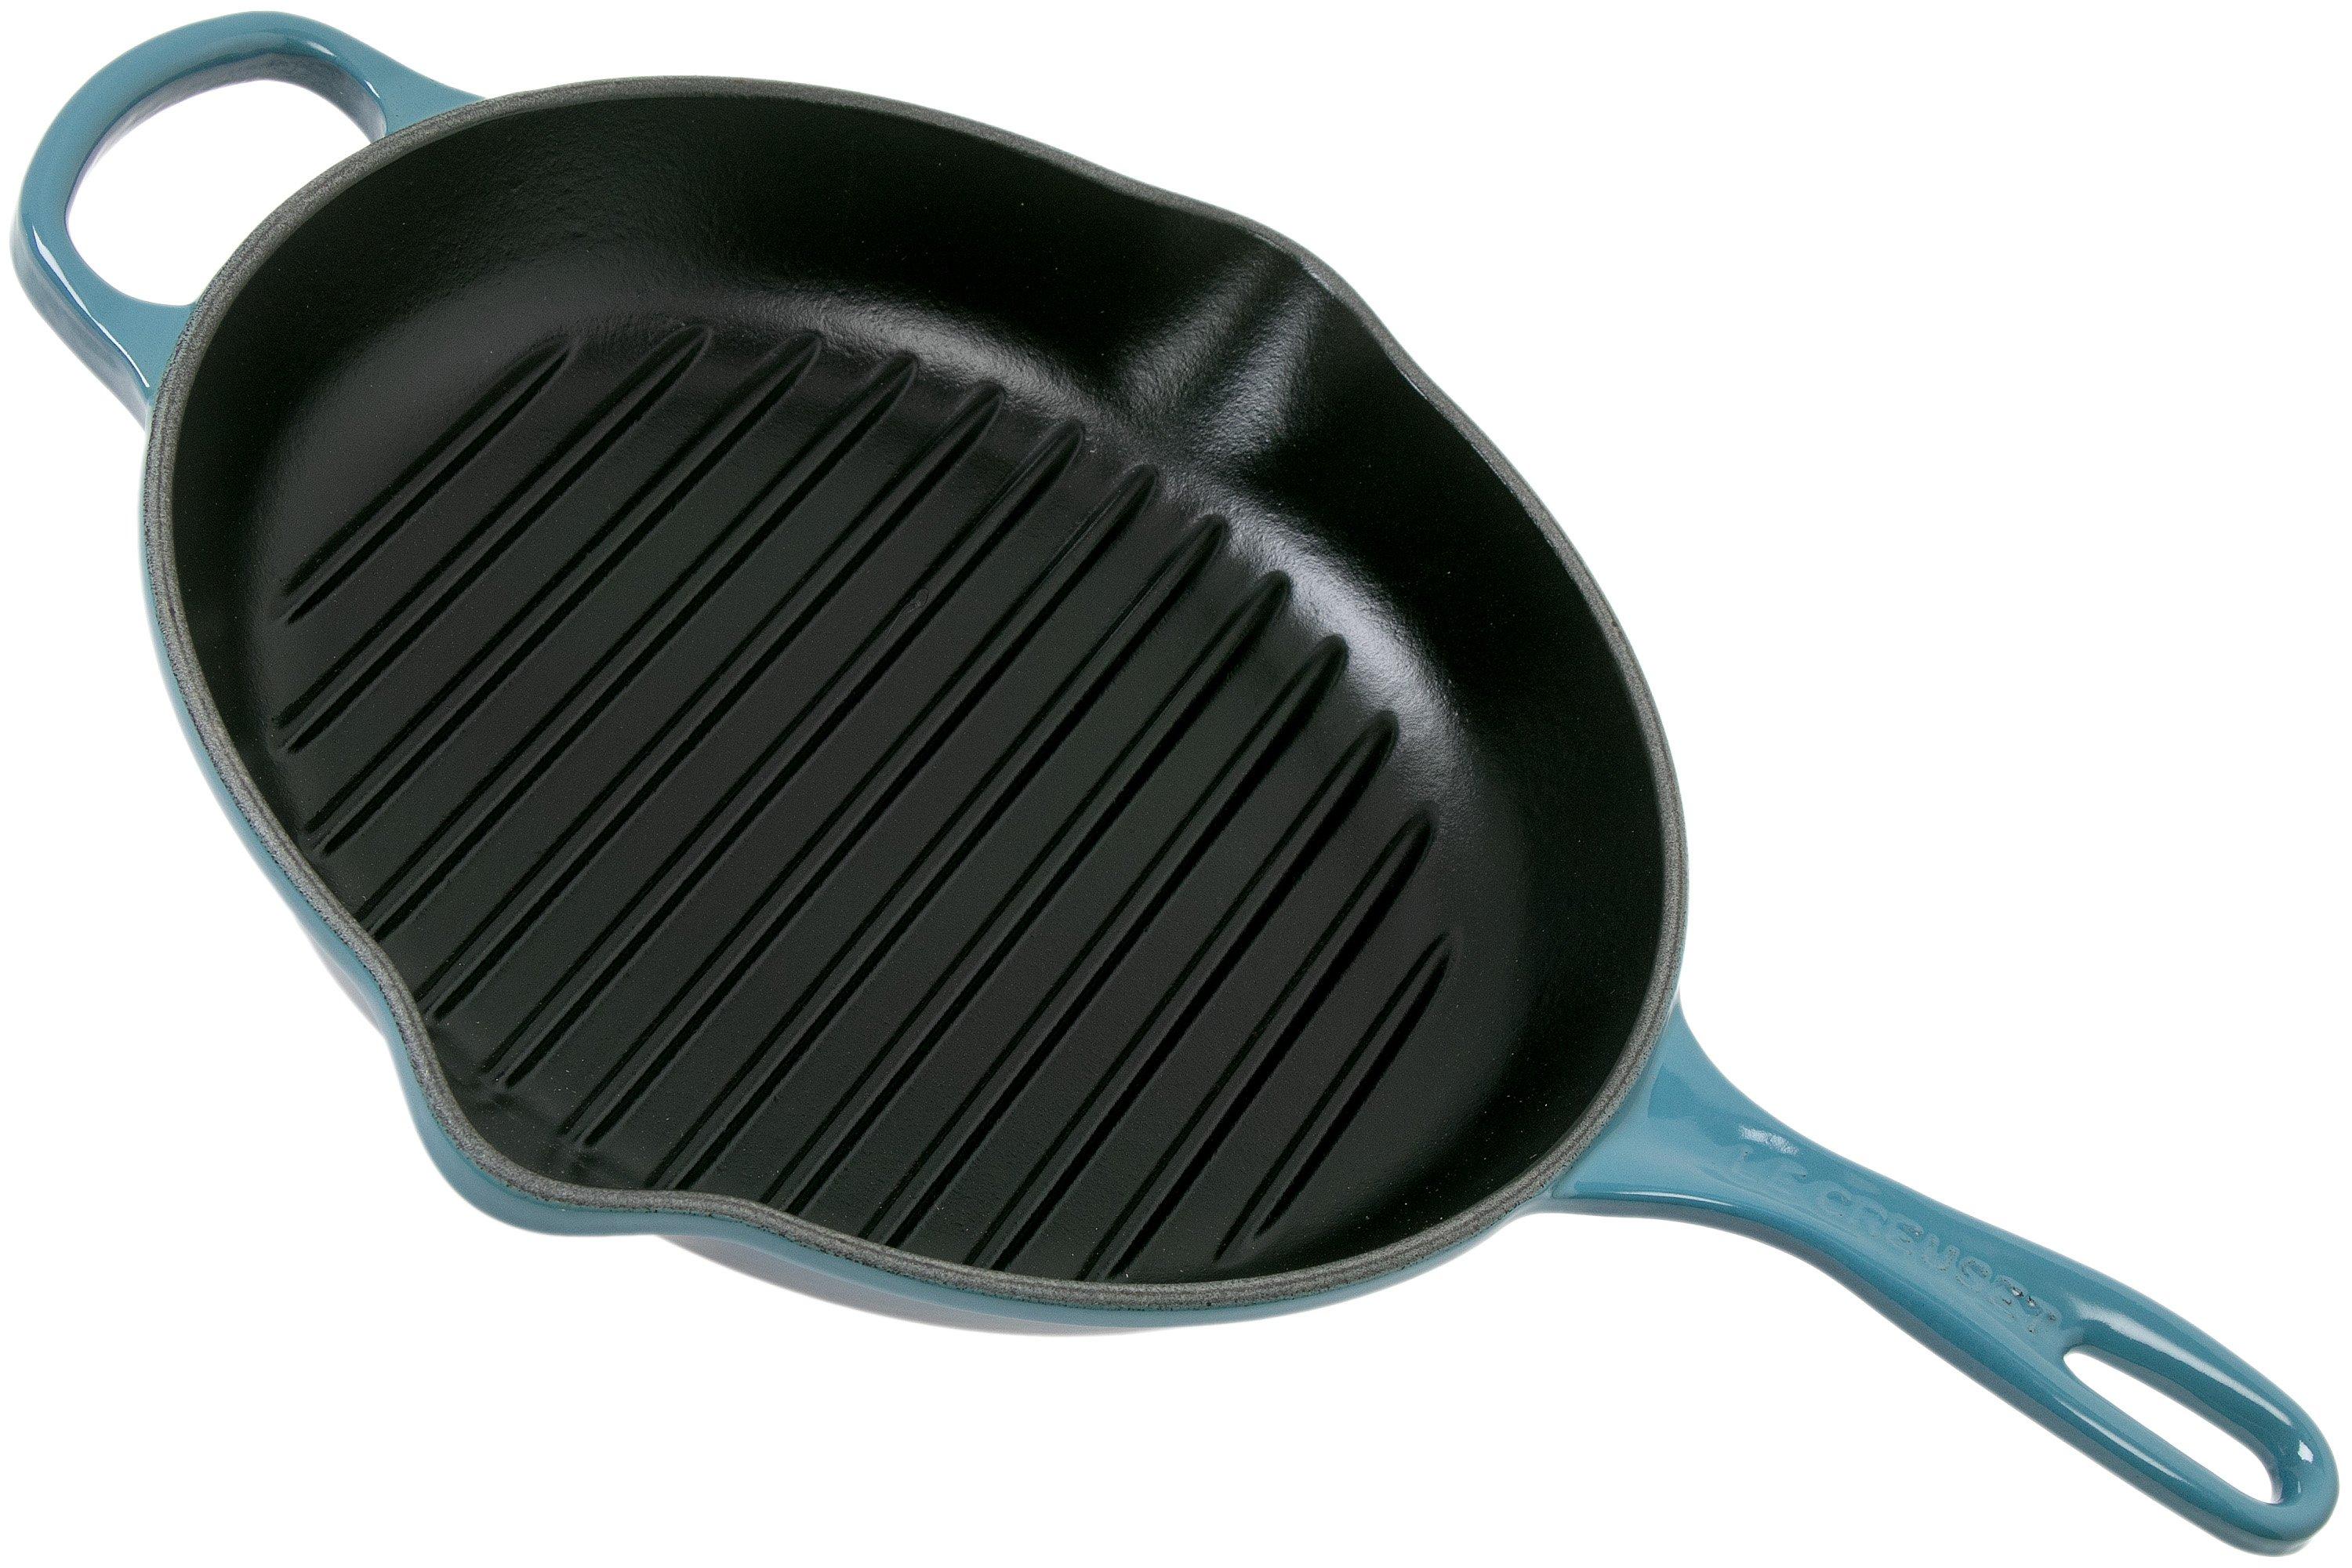 Le grill pan/skillet round, navy Advantageously shopping at